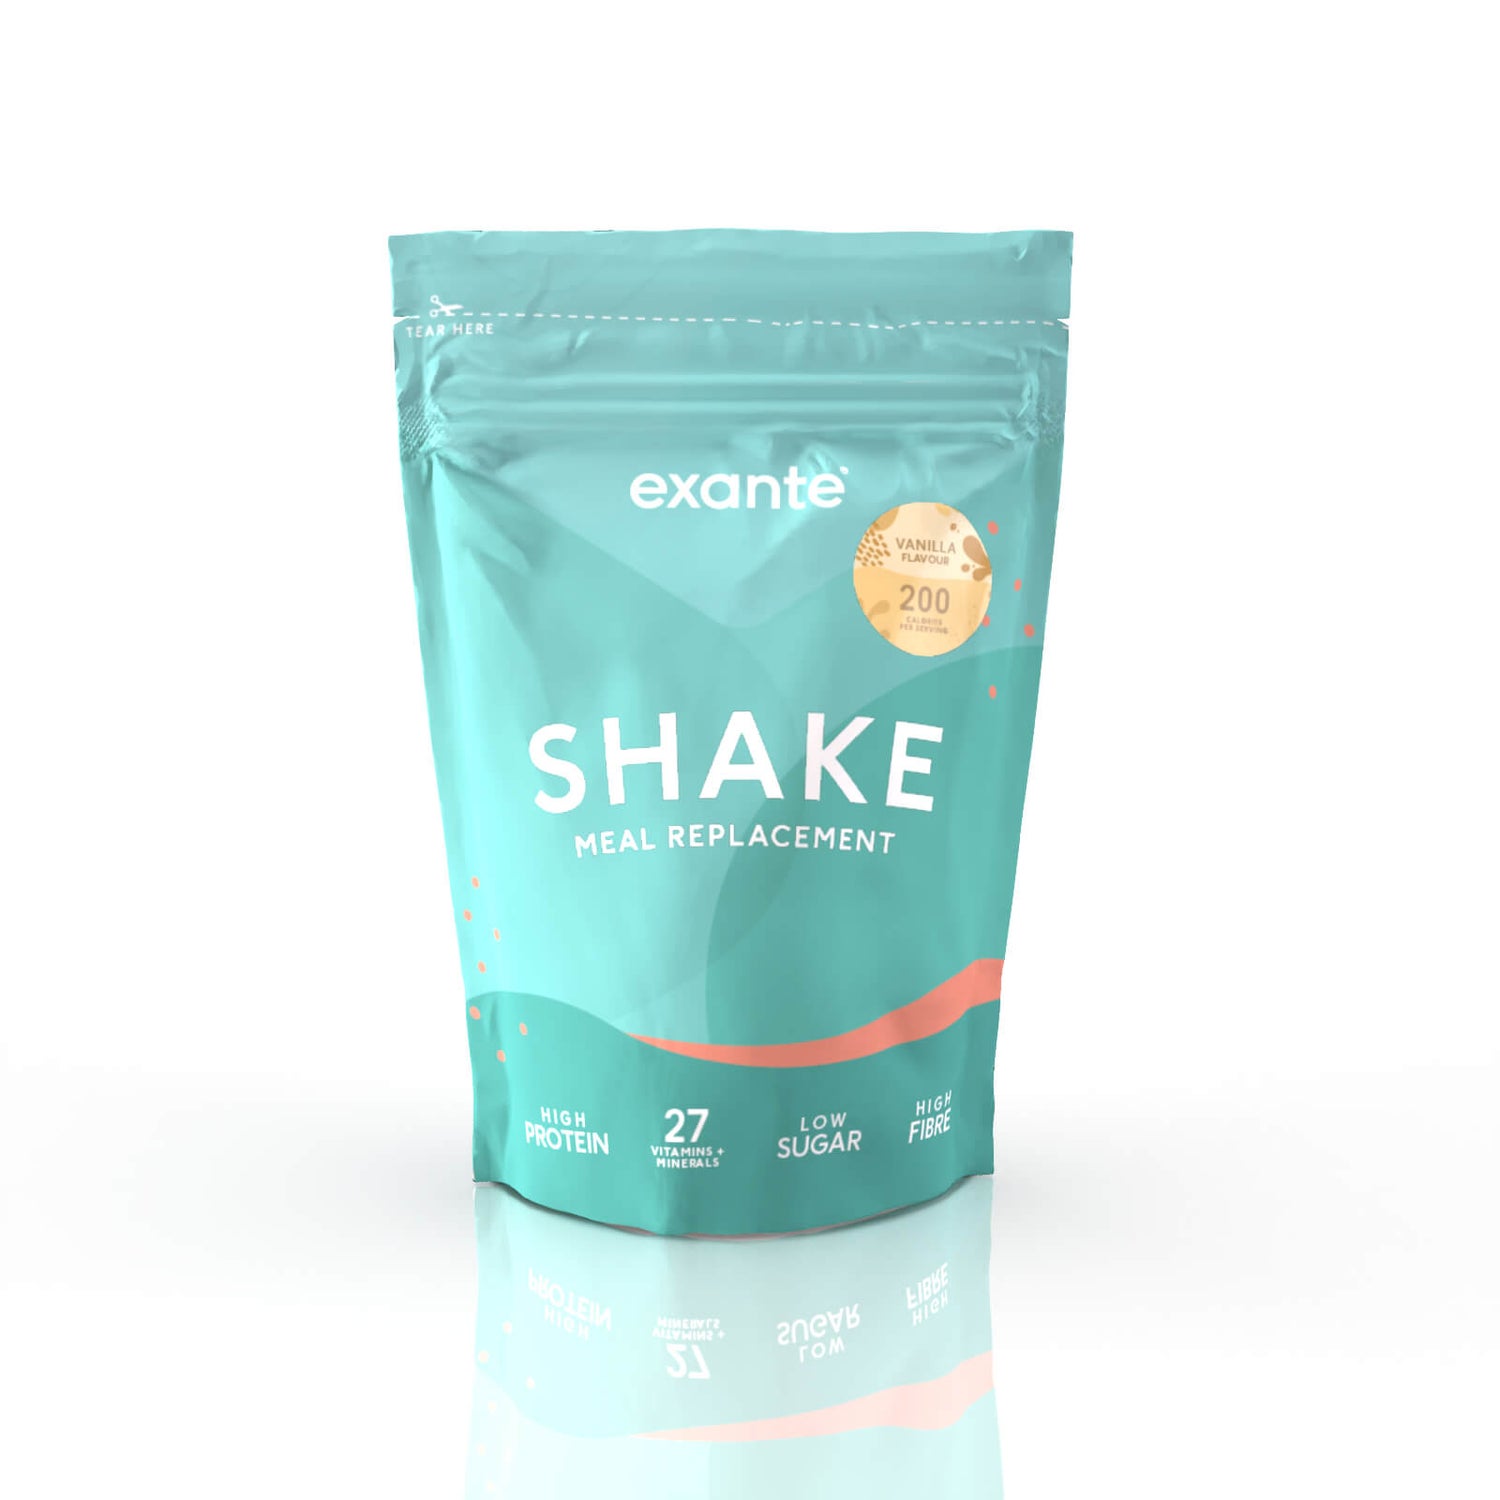 Exante Diet Meal Replacement Shake - 7 Serving Pouch